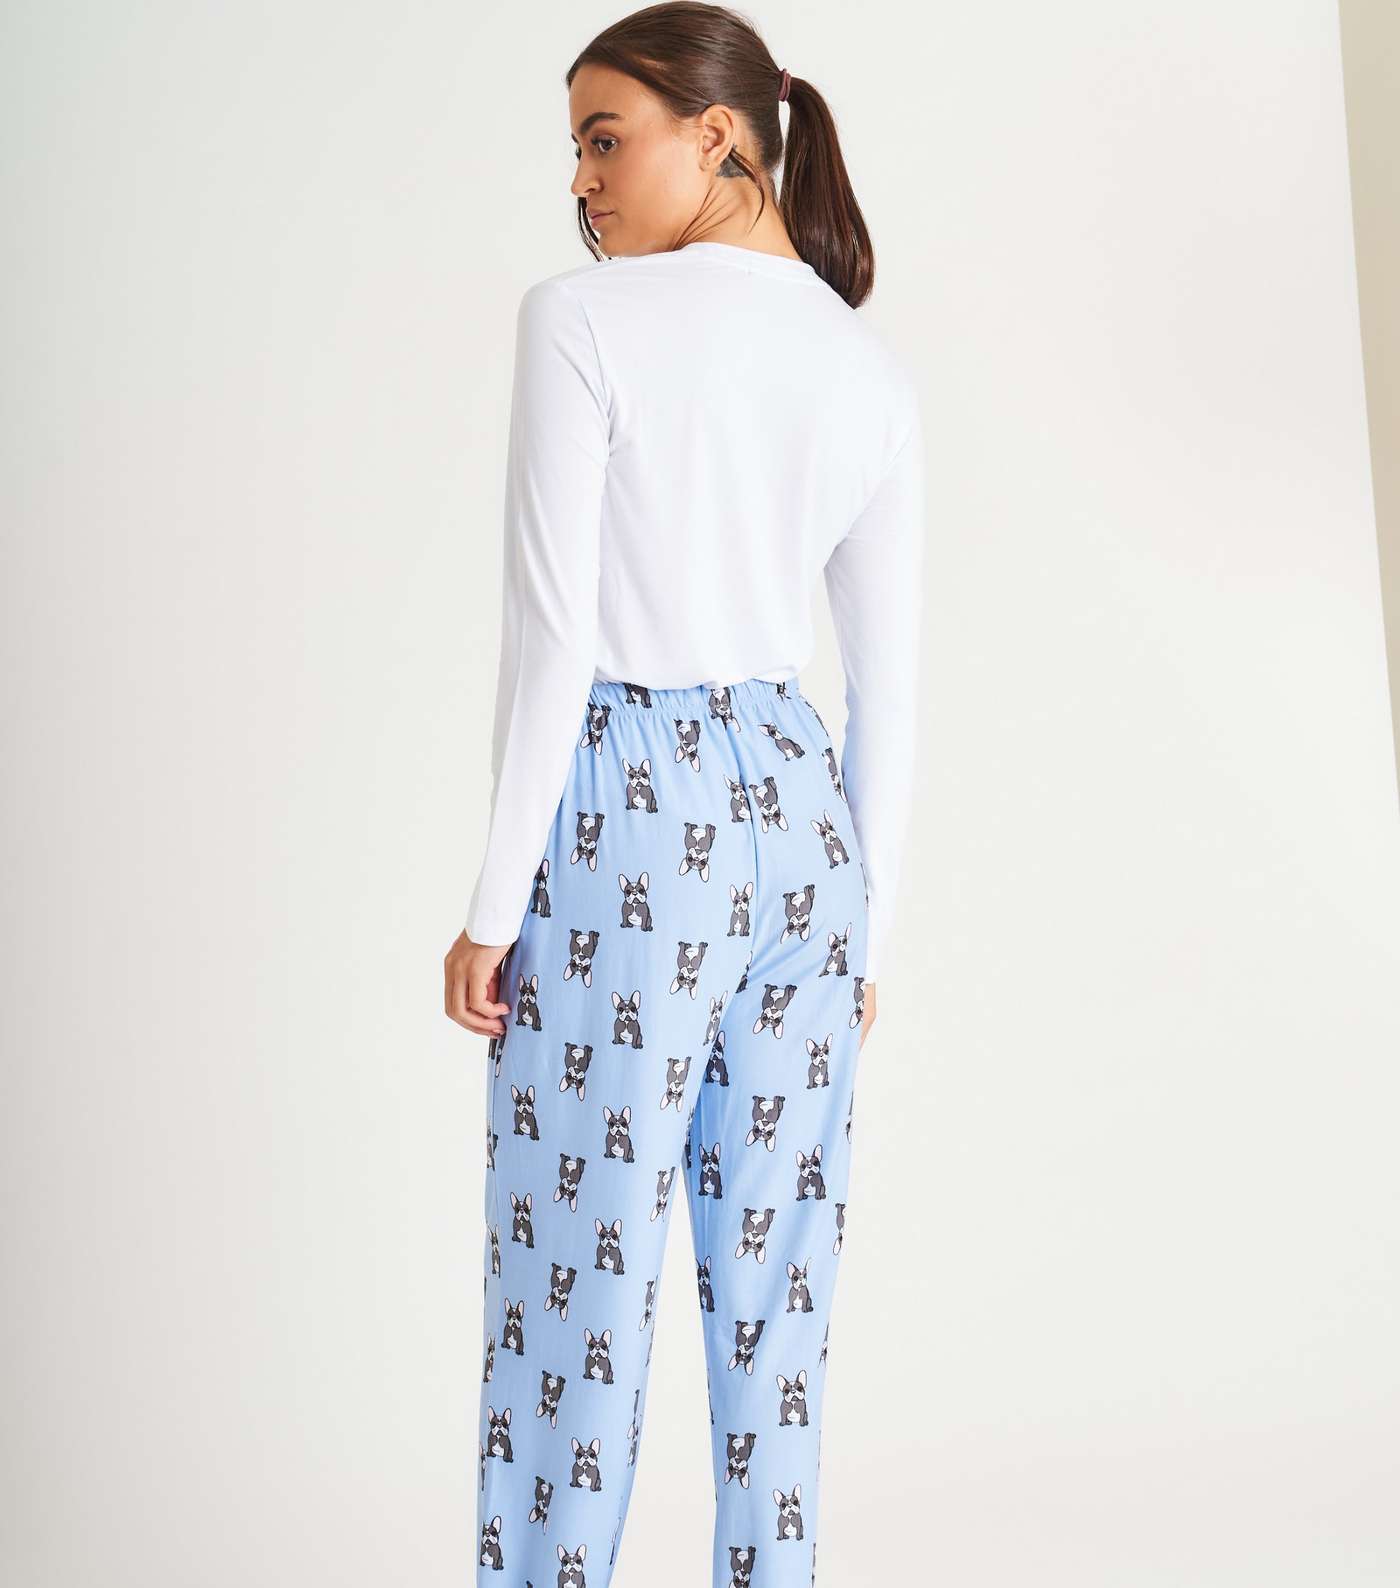 Loungeable Pale Blue Trouser Pyjama Set with French Bulldog Print Image 4